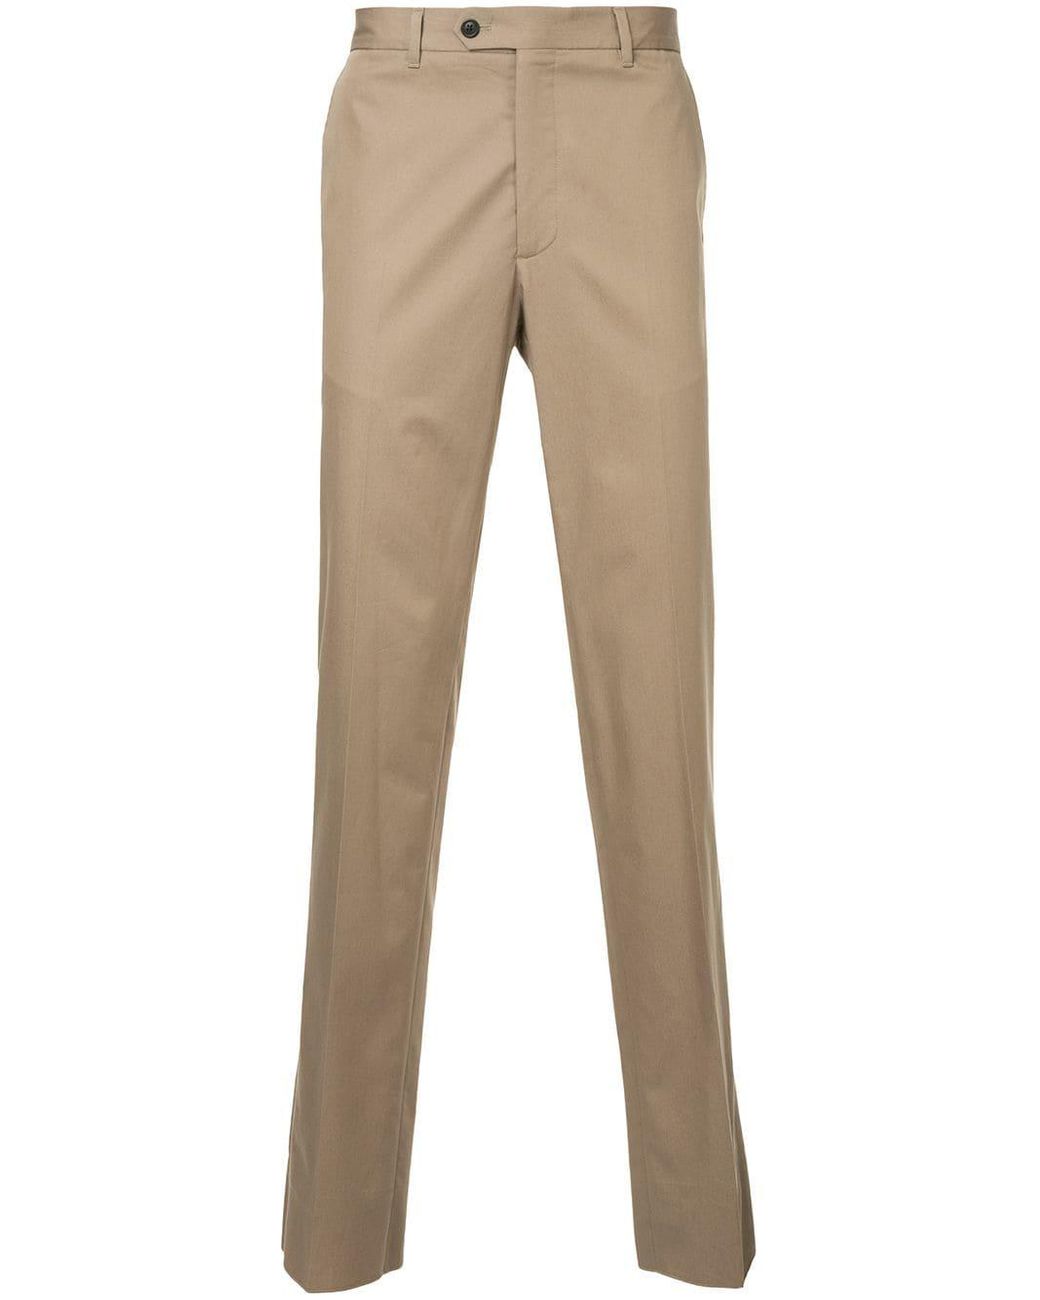 Gieves & Hawkes Cotton Tailored Trousers in Brown for Men - Lyst